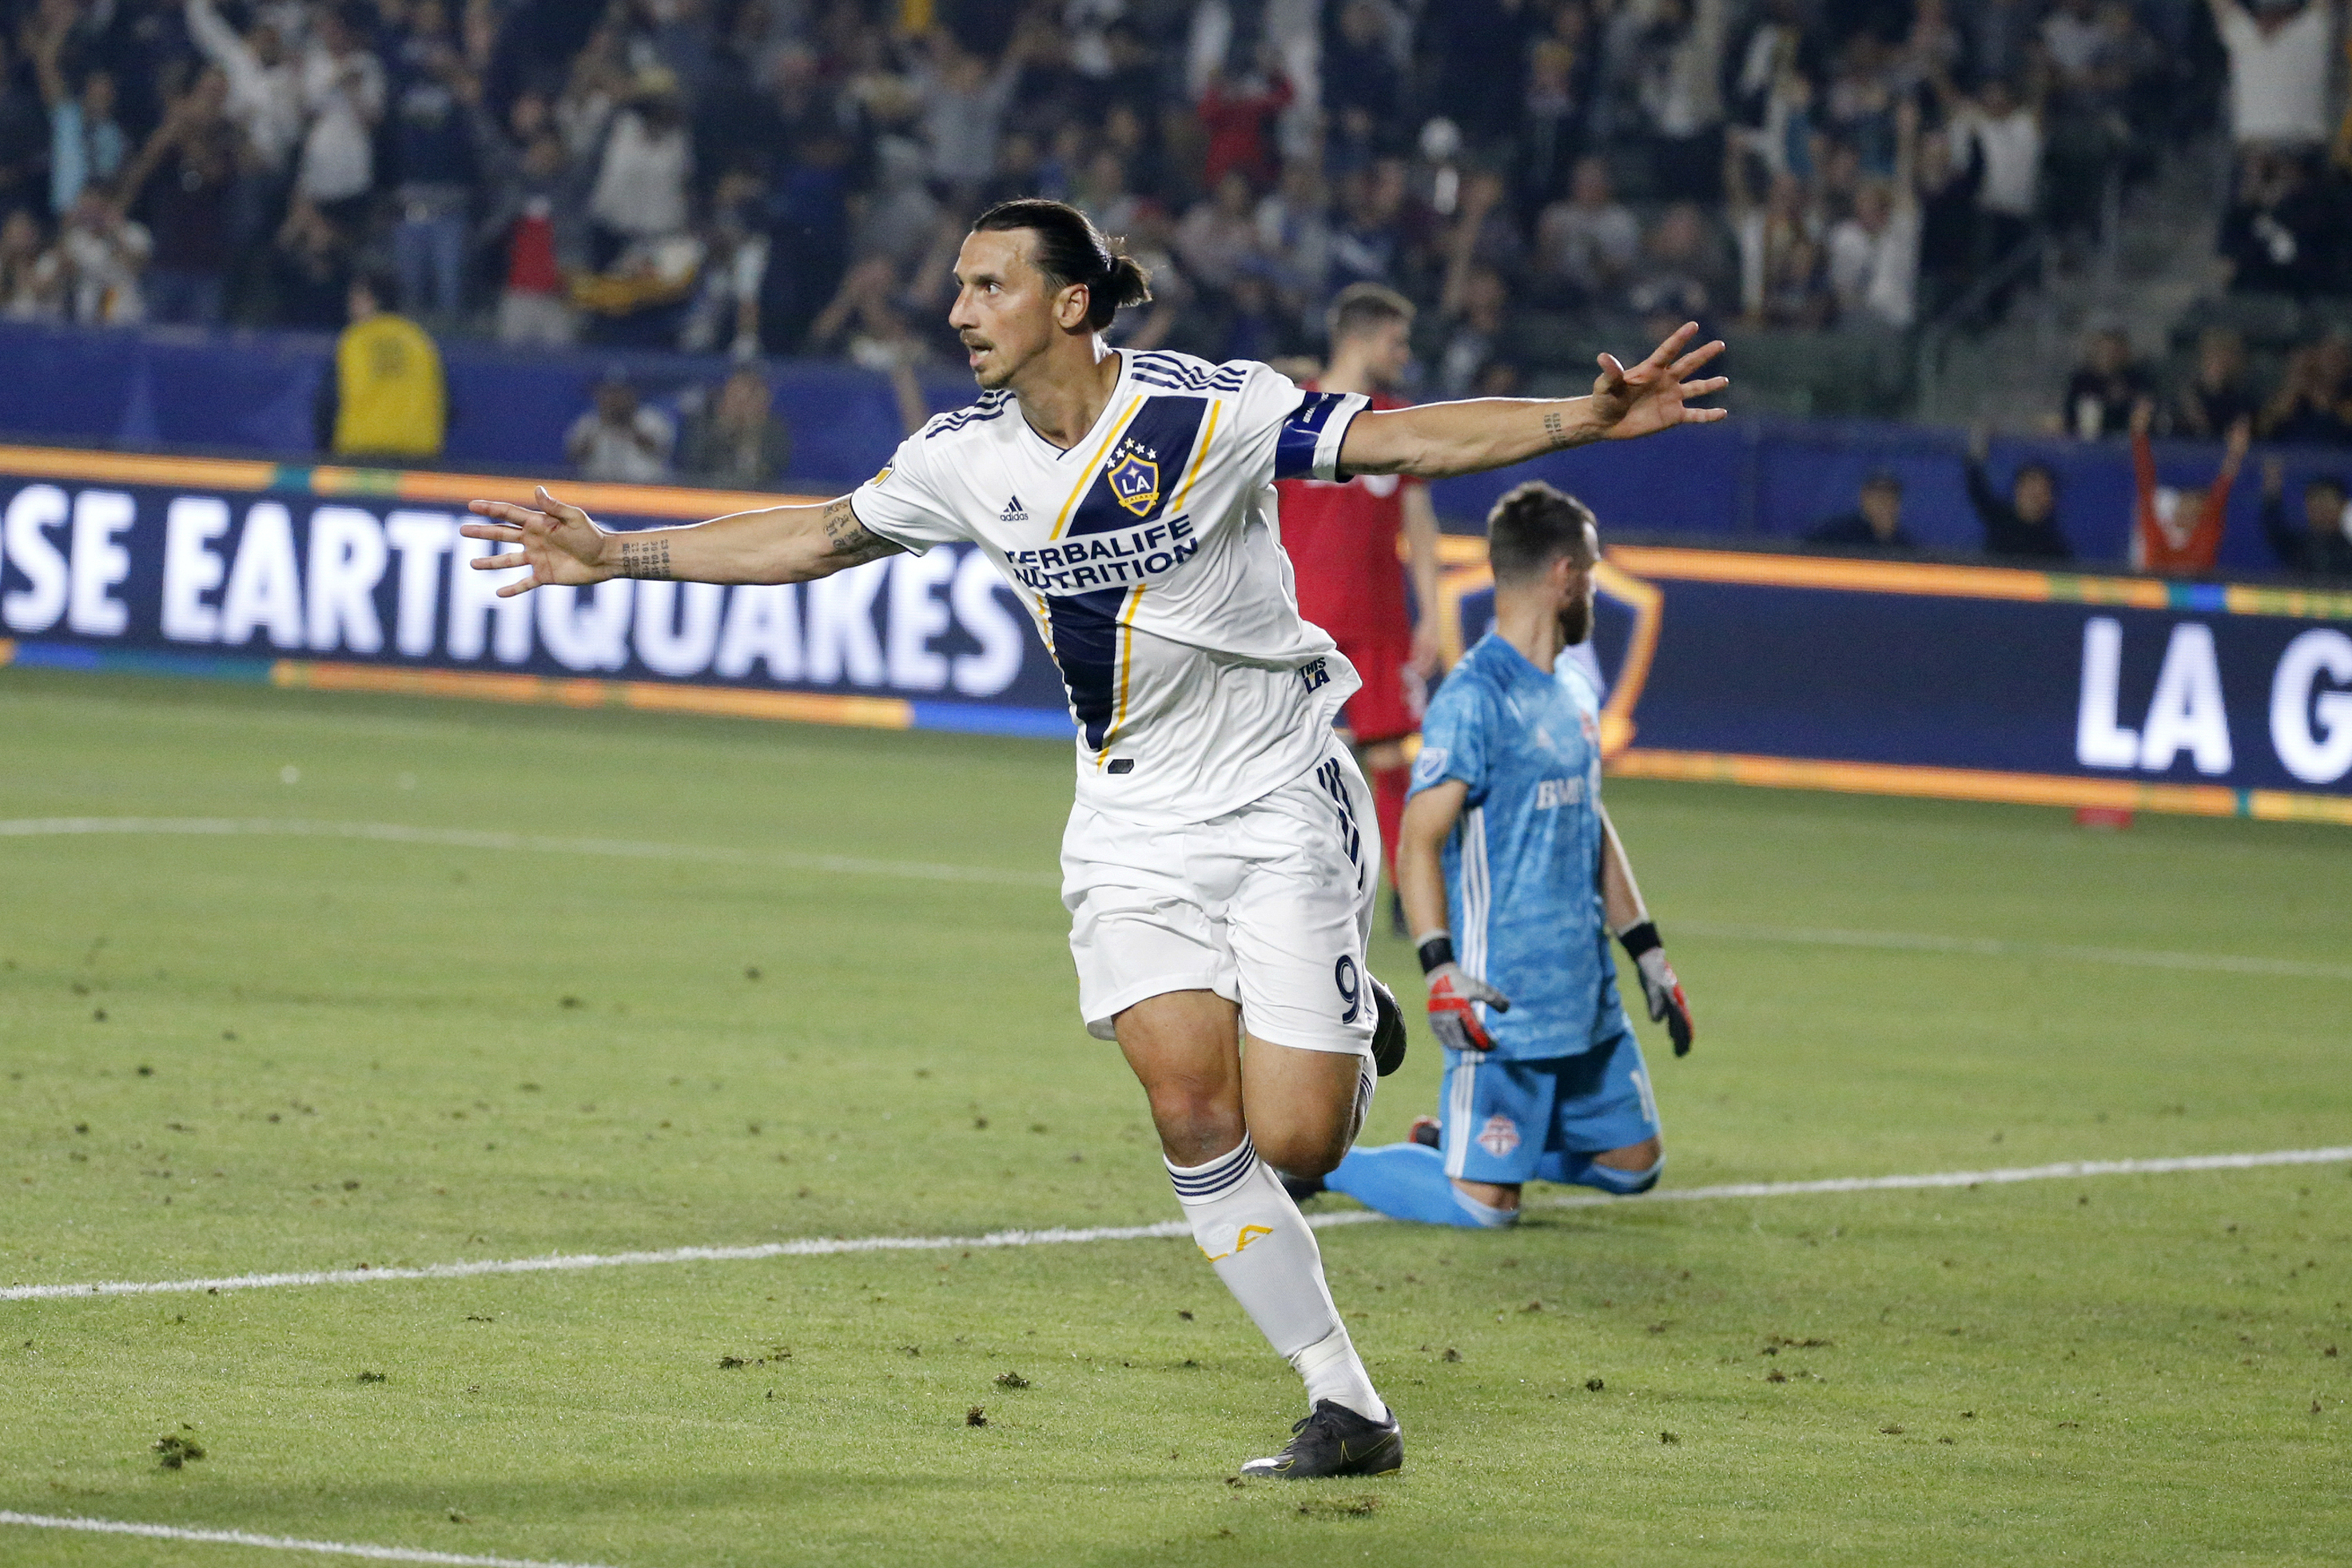 Ibrahimovic gives no clues about future after playoff loss